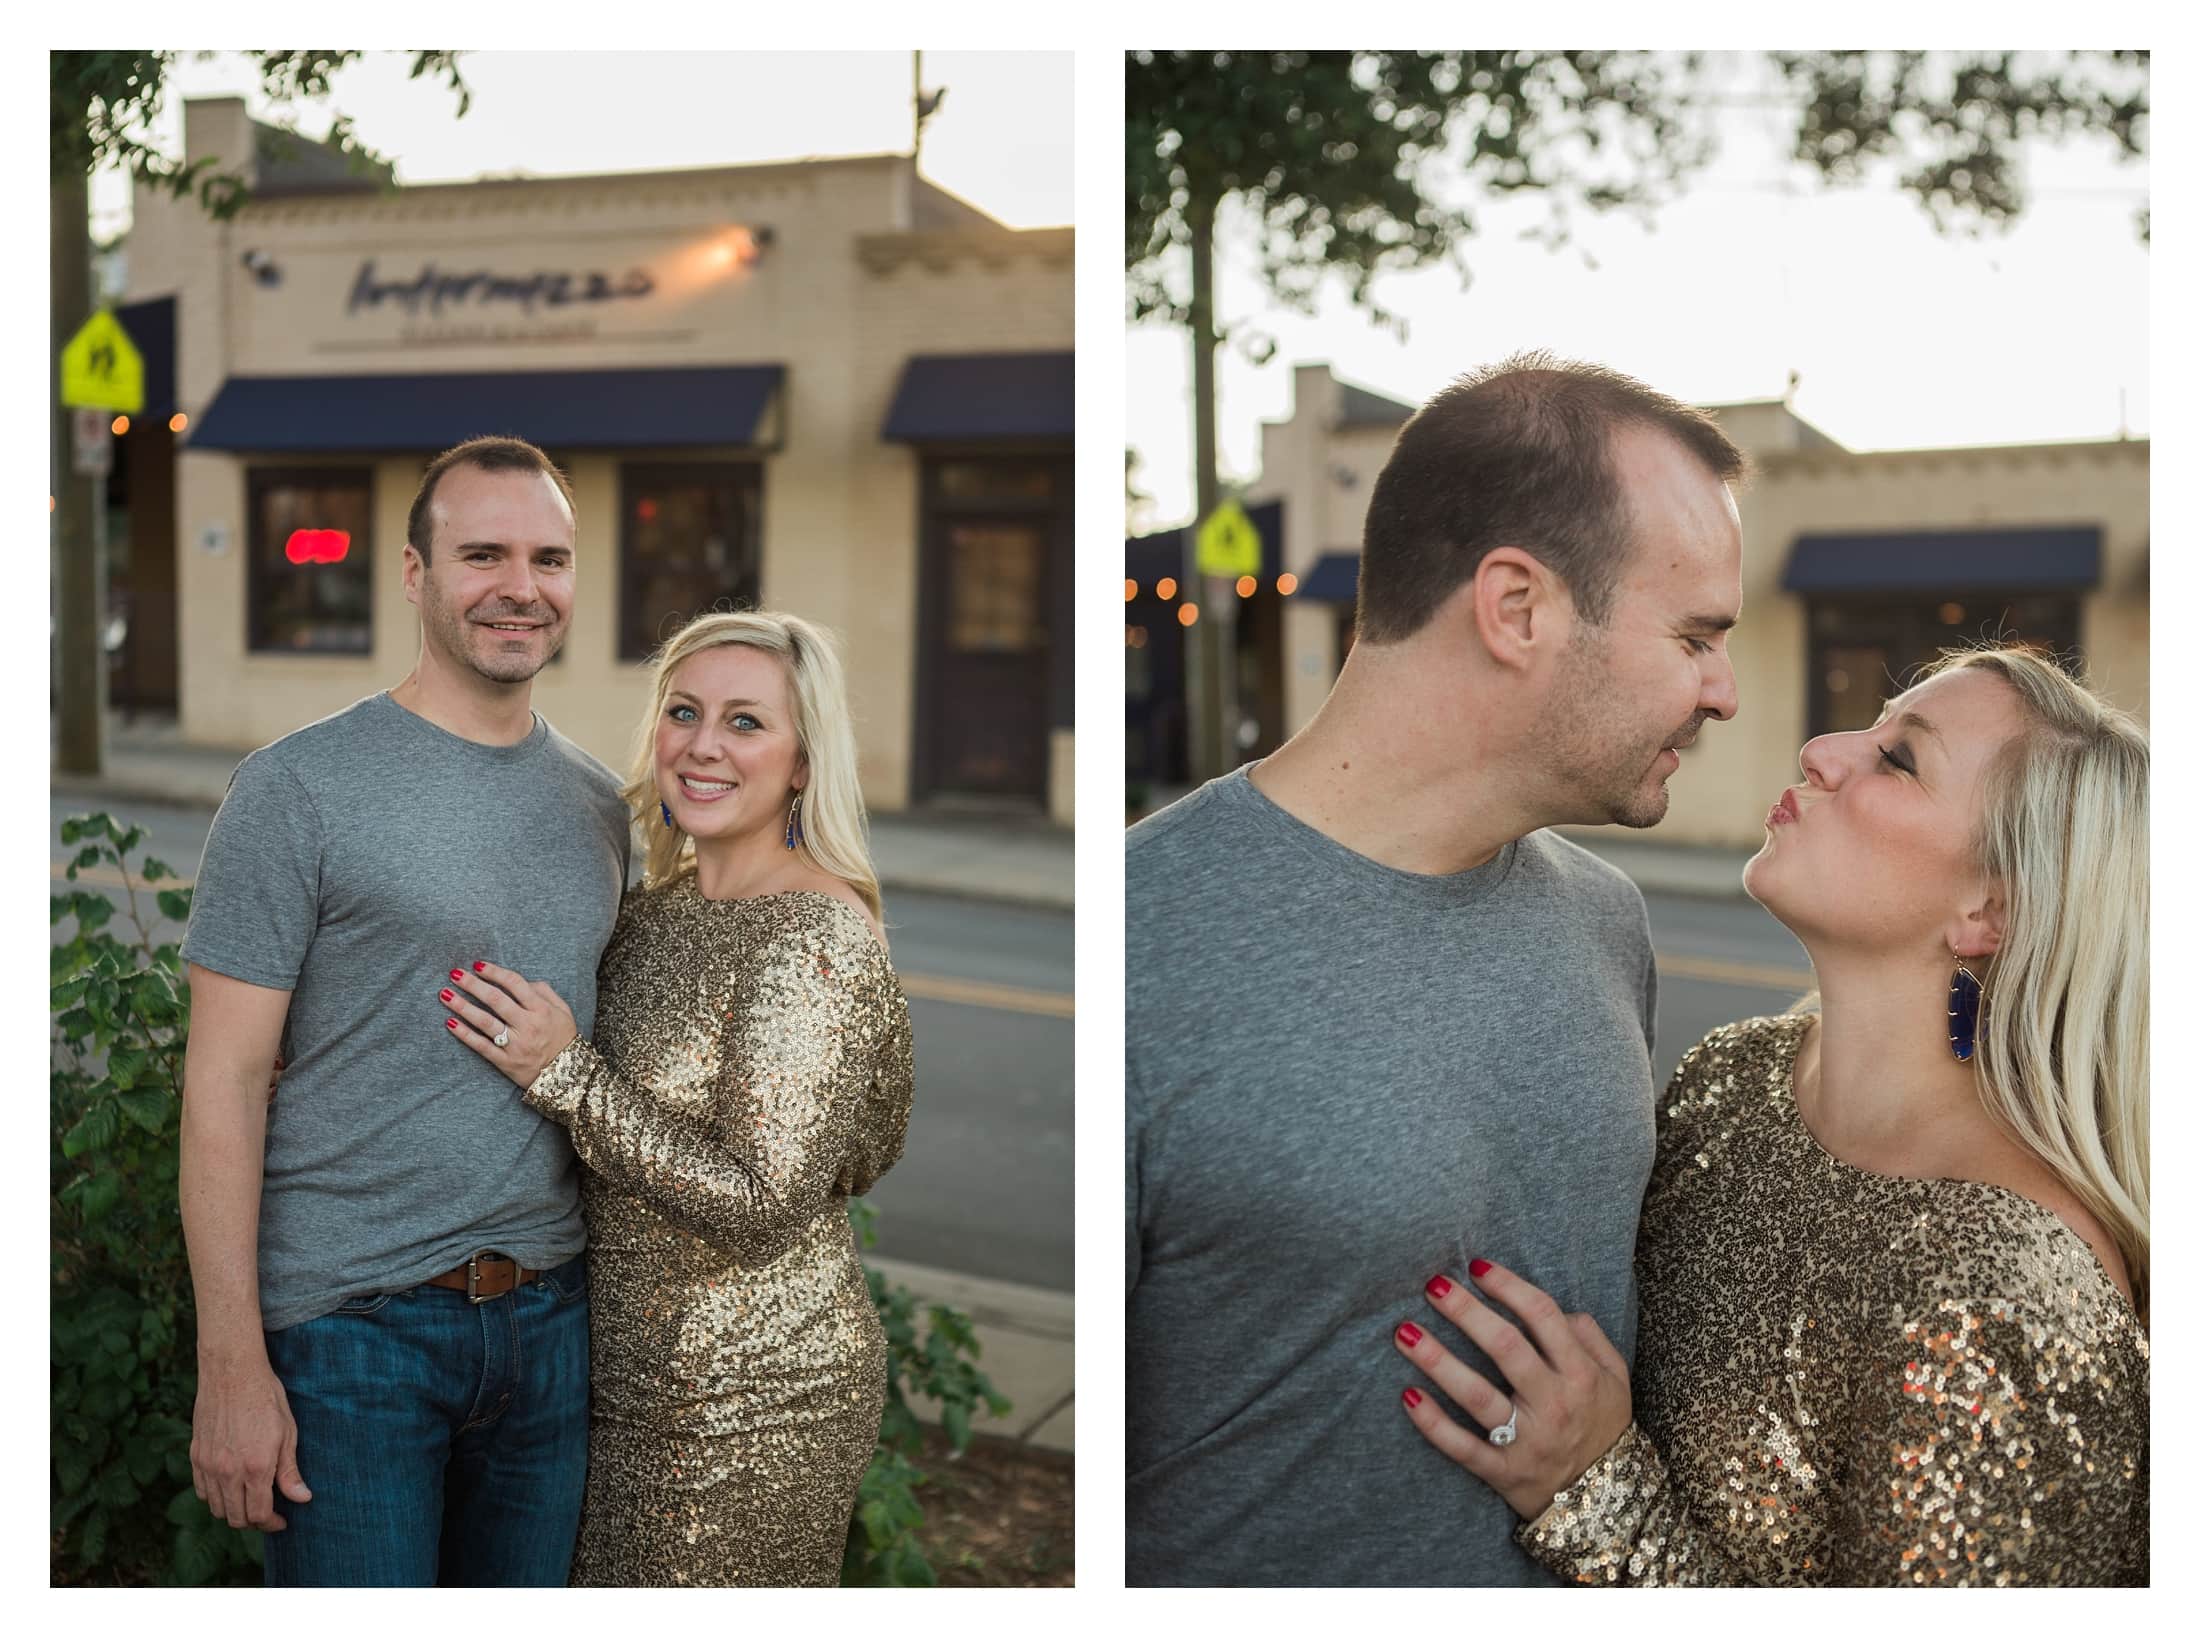 Couple engagement pictures, Charlotte couple in front of place they met, unique engagement pictures